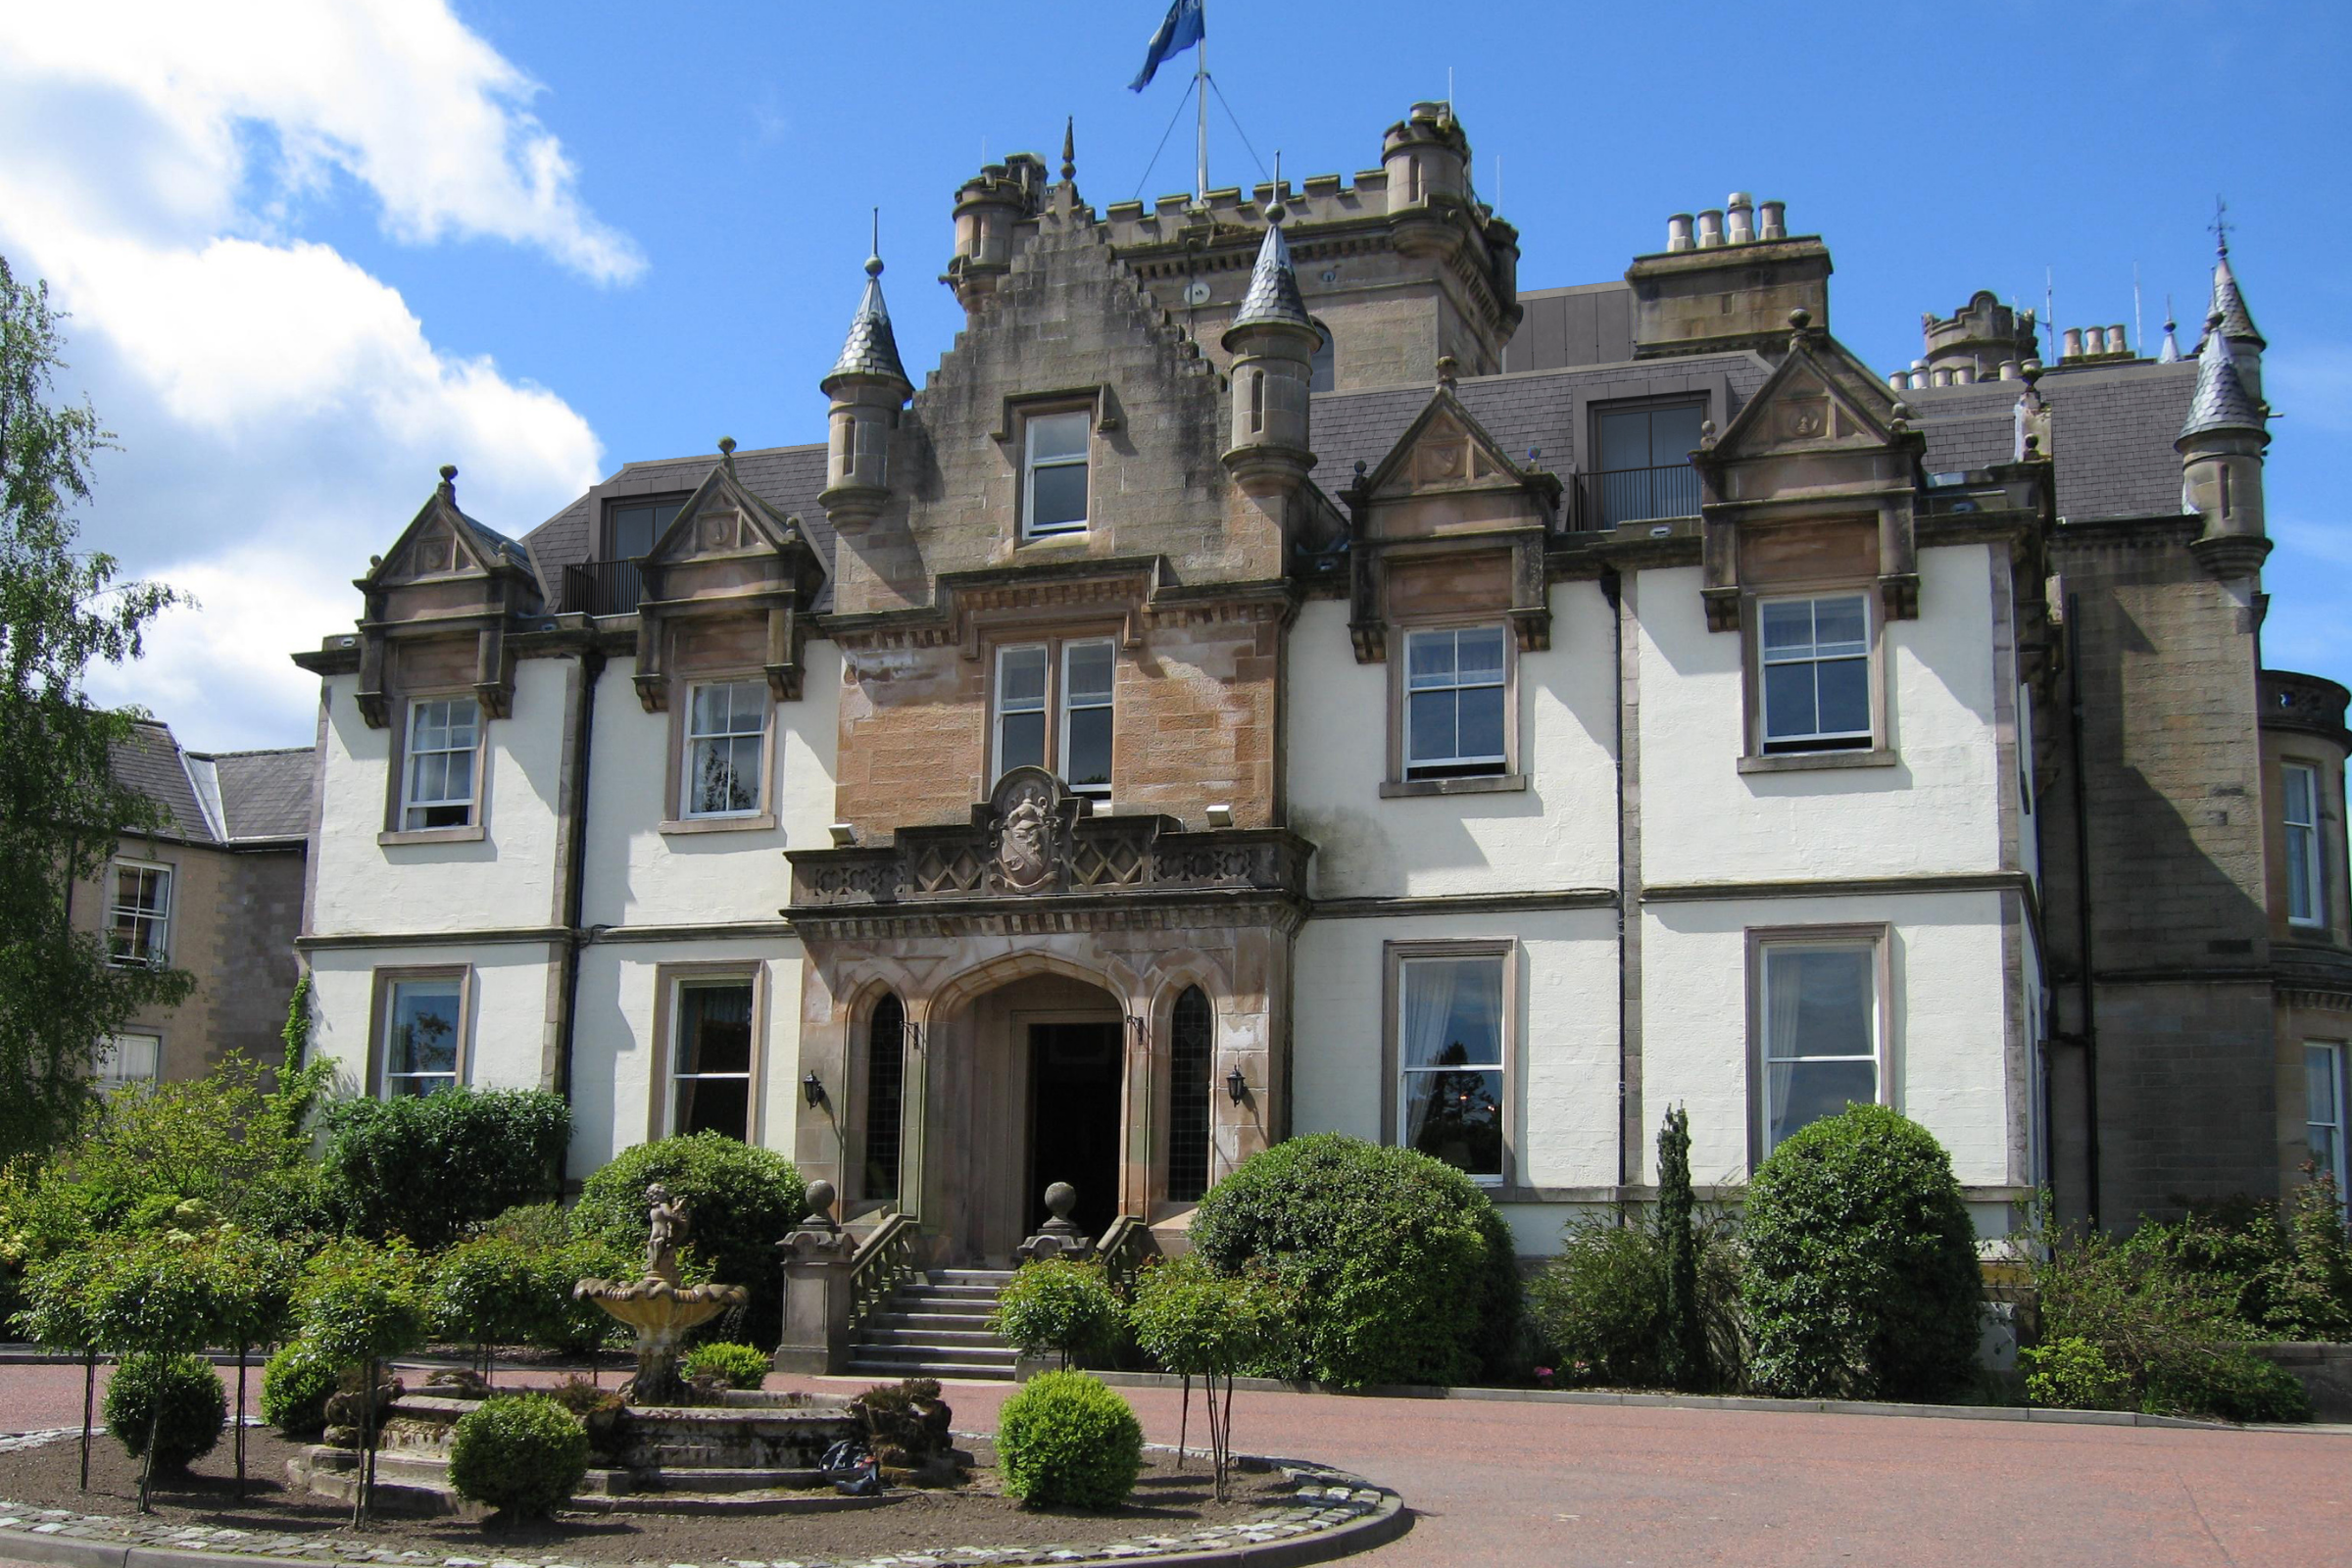 Cameron House hotel re-opens after a 3-year restoration